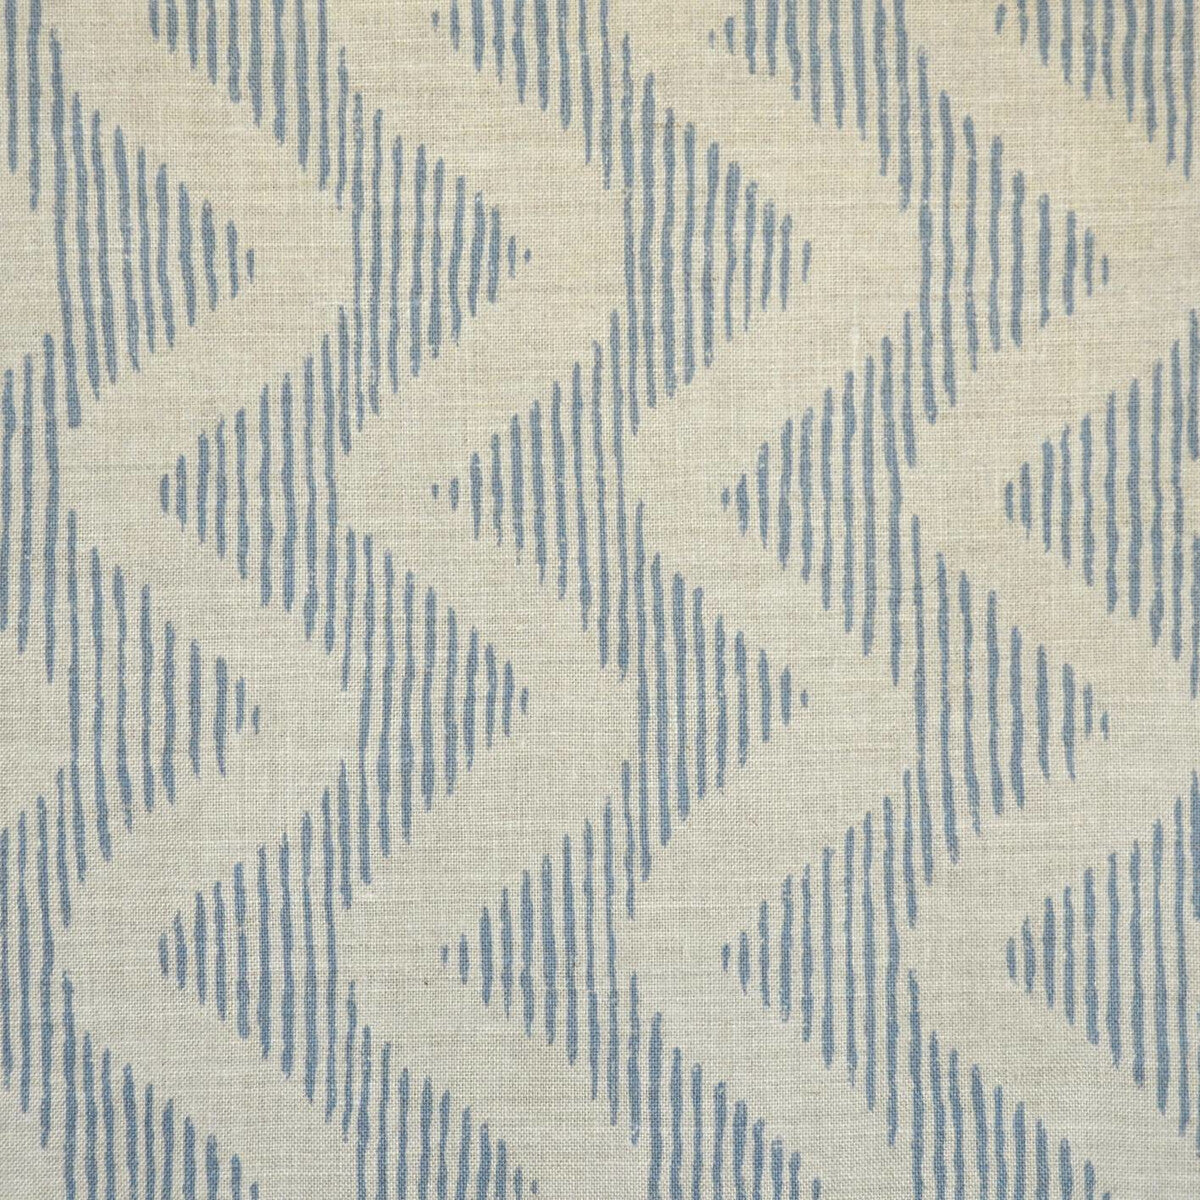 Colebrook fabric in blue/natural color - pattern BFC-3632.5.0 - by Lee Jofa in the Blithfield collection